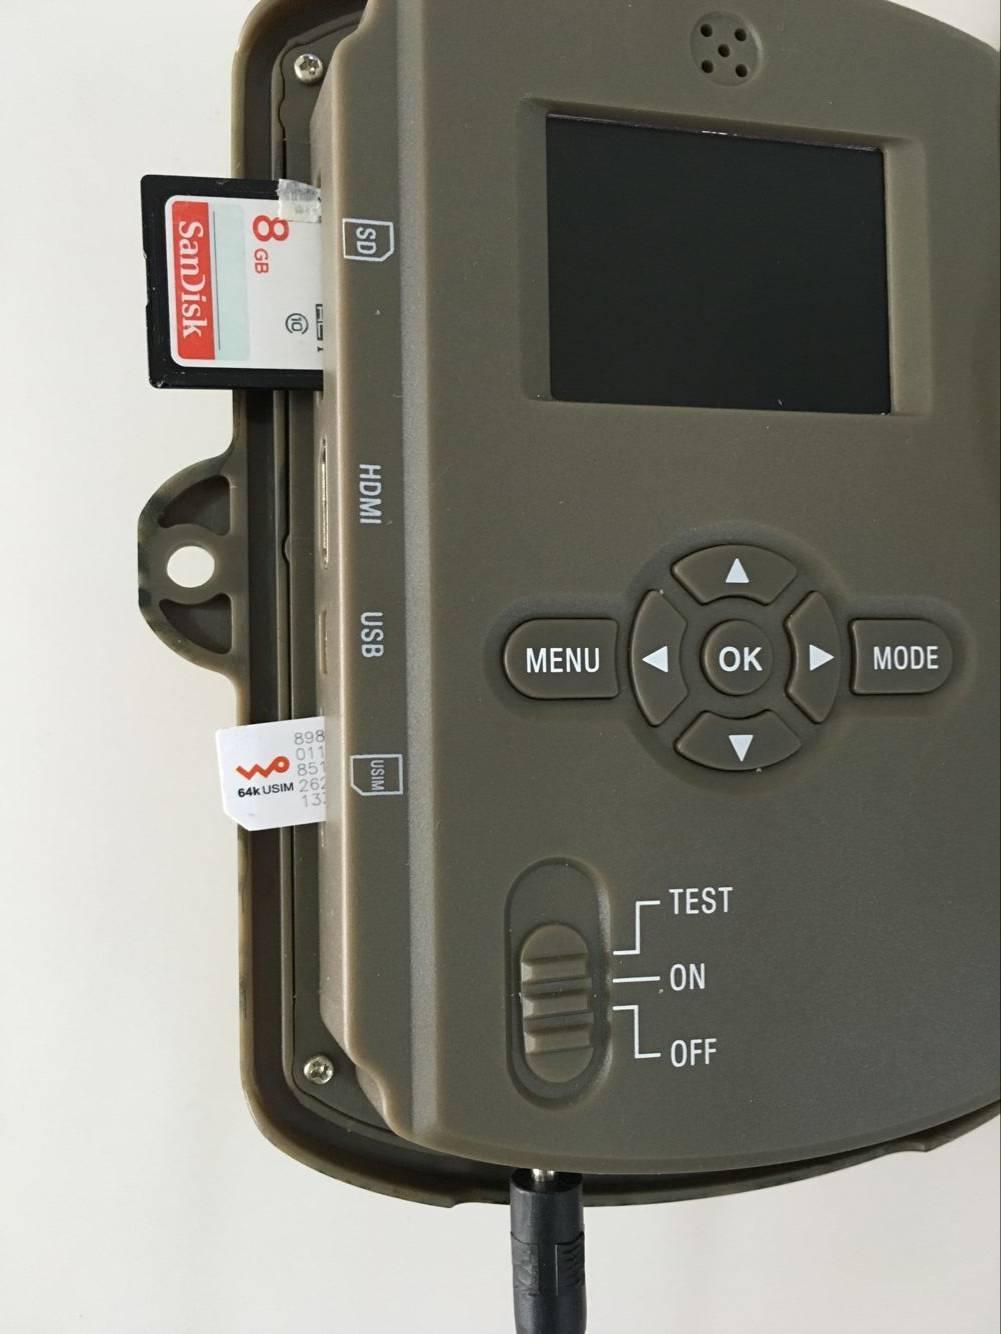 To insert an SD/SDHC memory card into the memory card slot of the device, push it into the slot until it clicks into place.